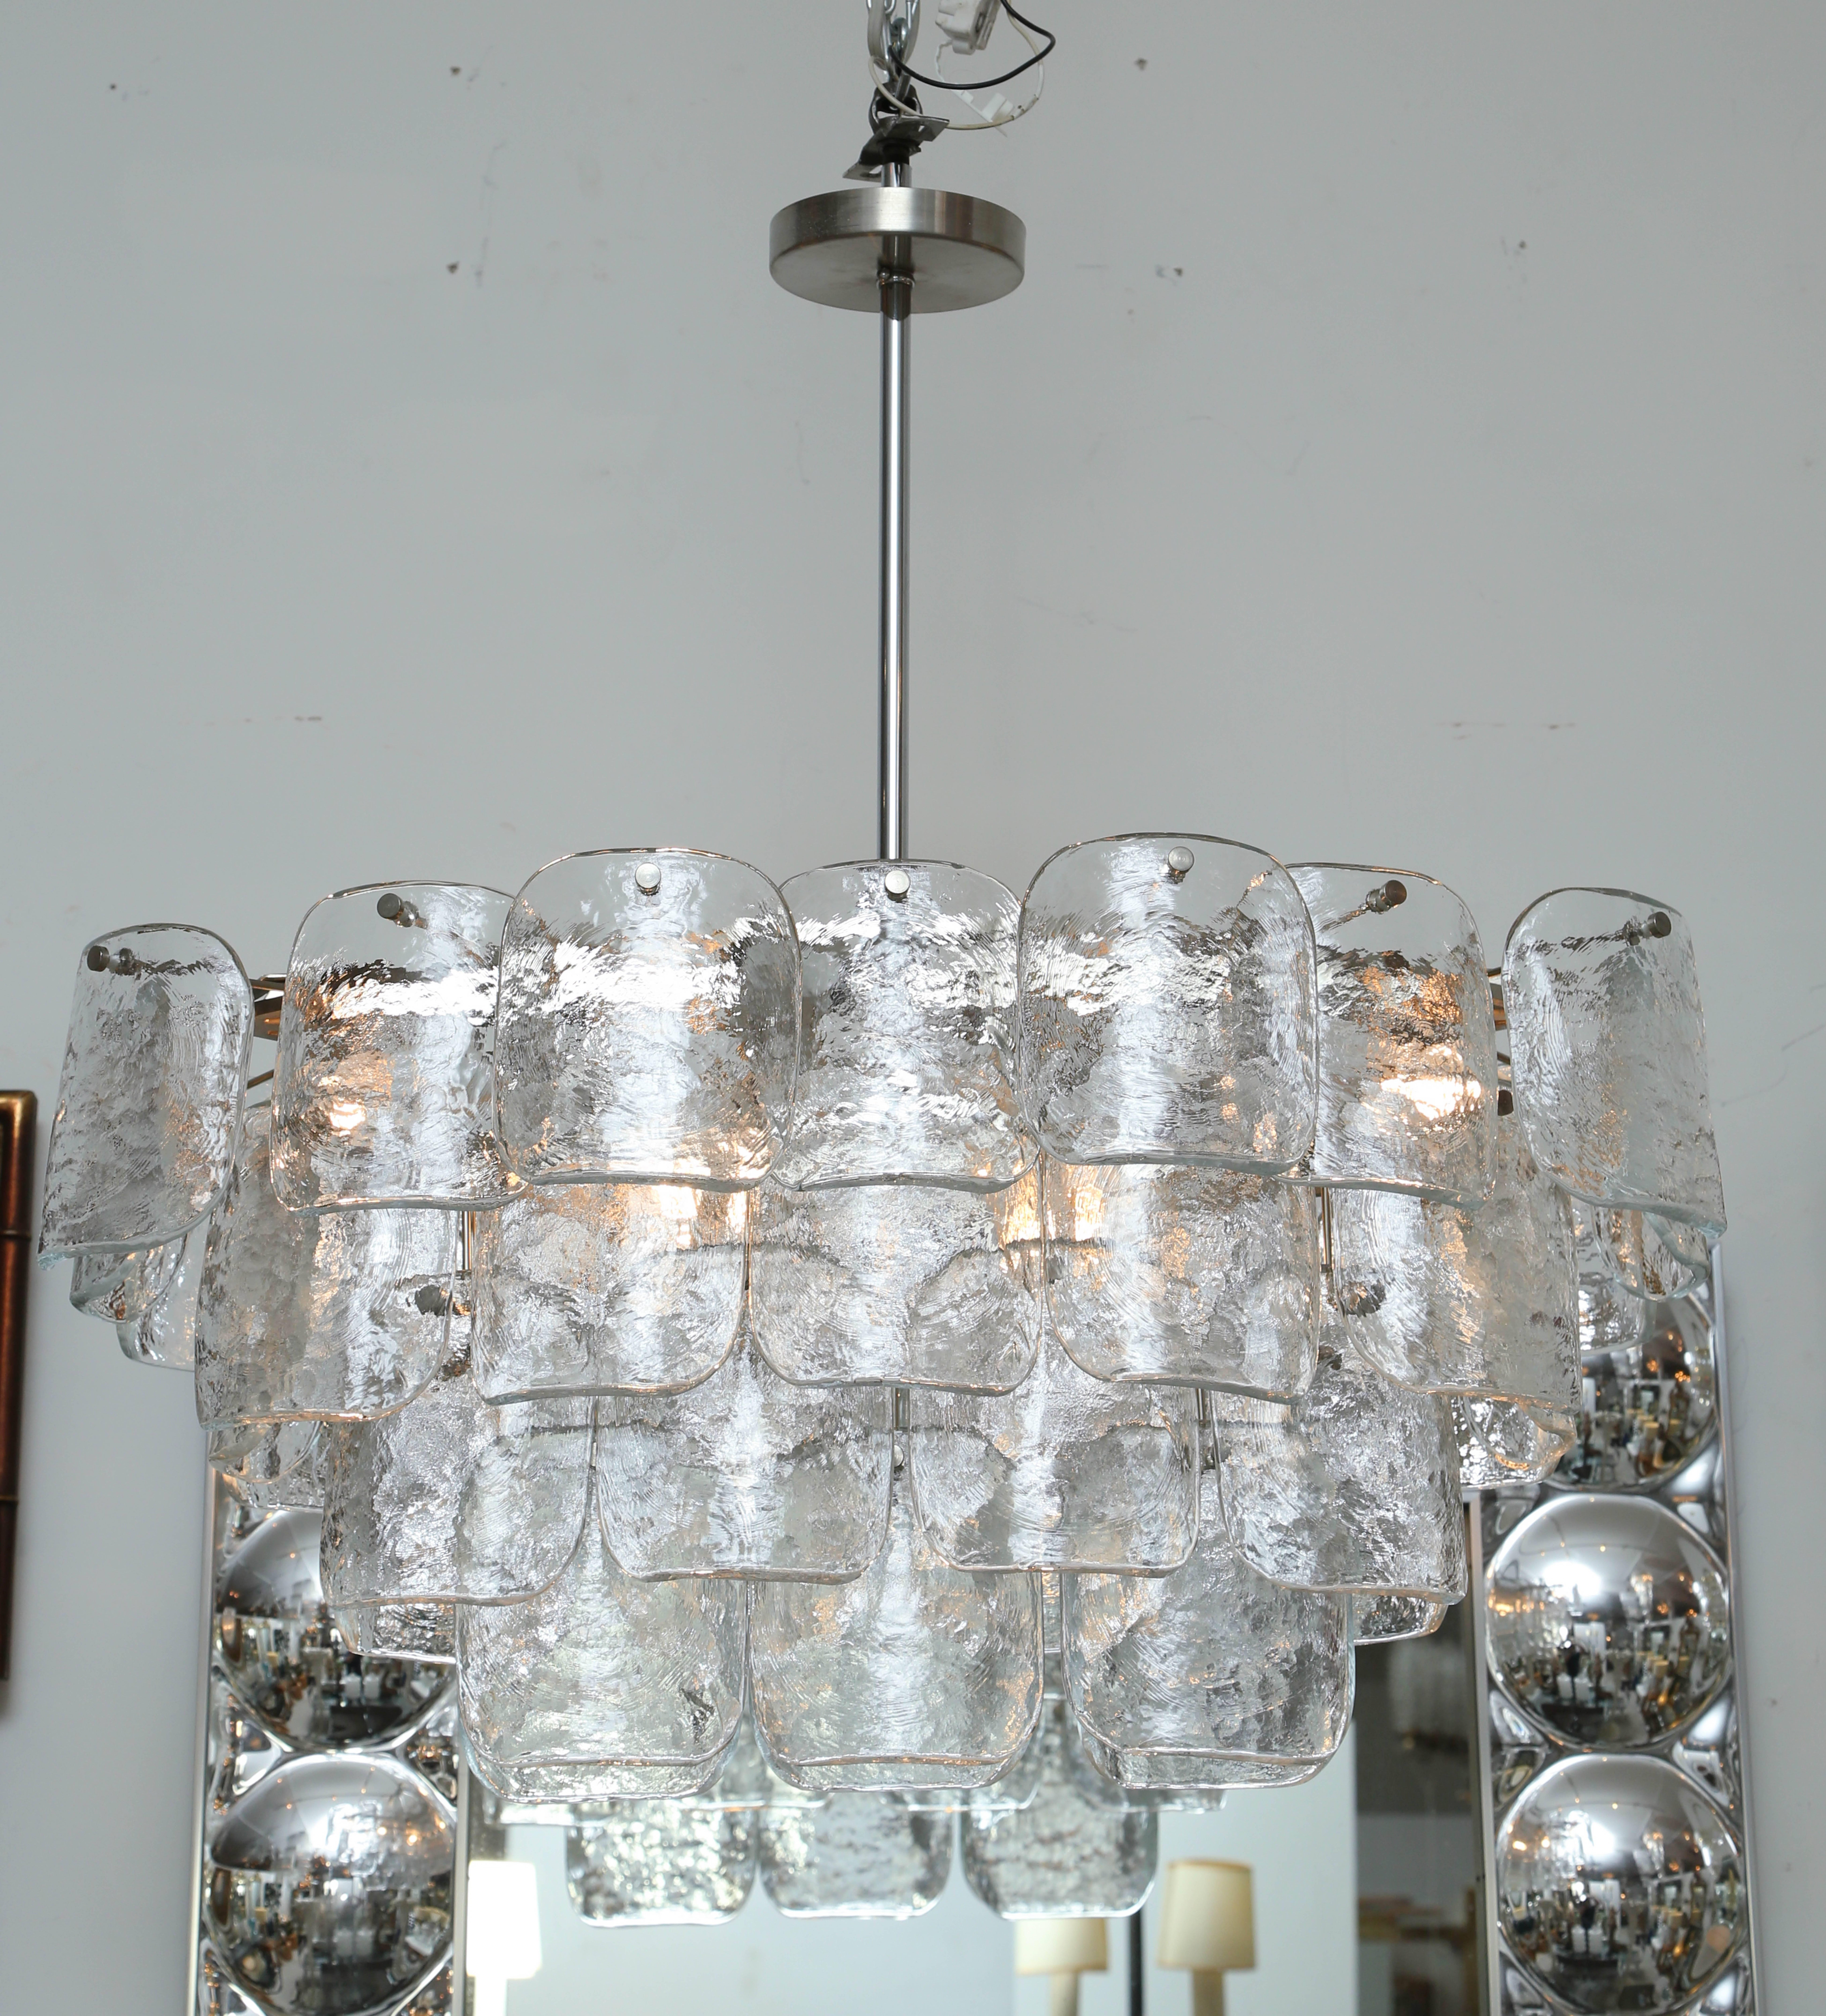 Vintage Mazzega oval clear multi-tiered light fixture. The fixture dates to circa 1970s. There are 42 pieces glass pendants.